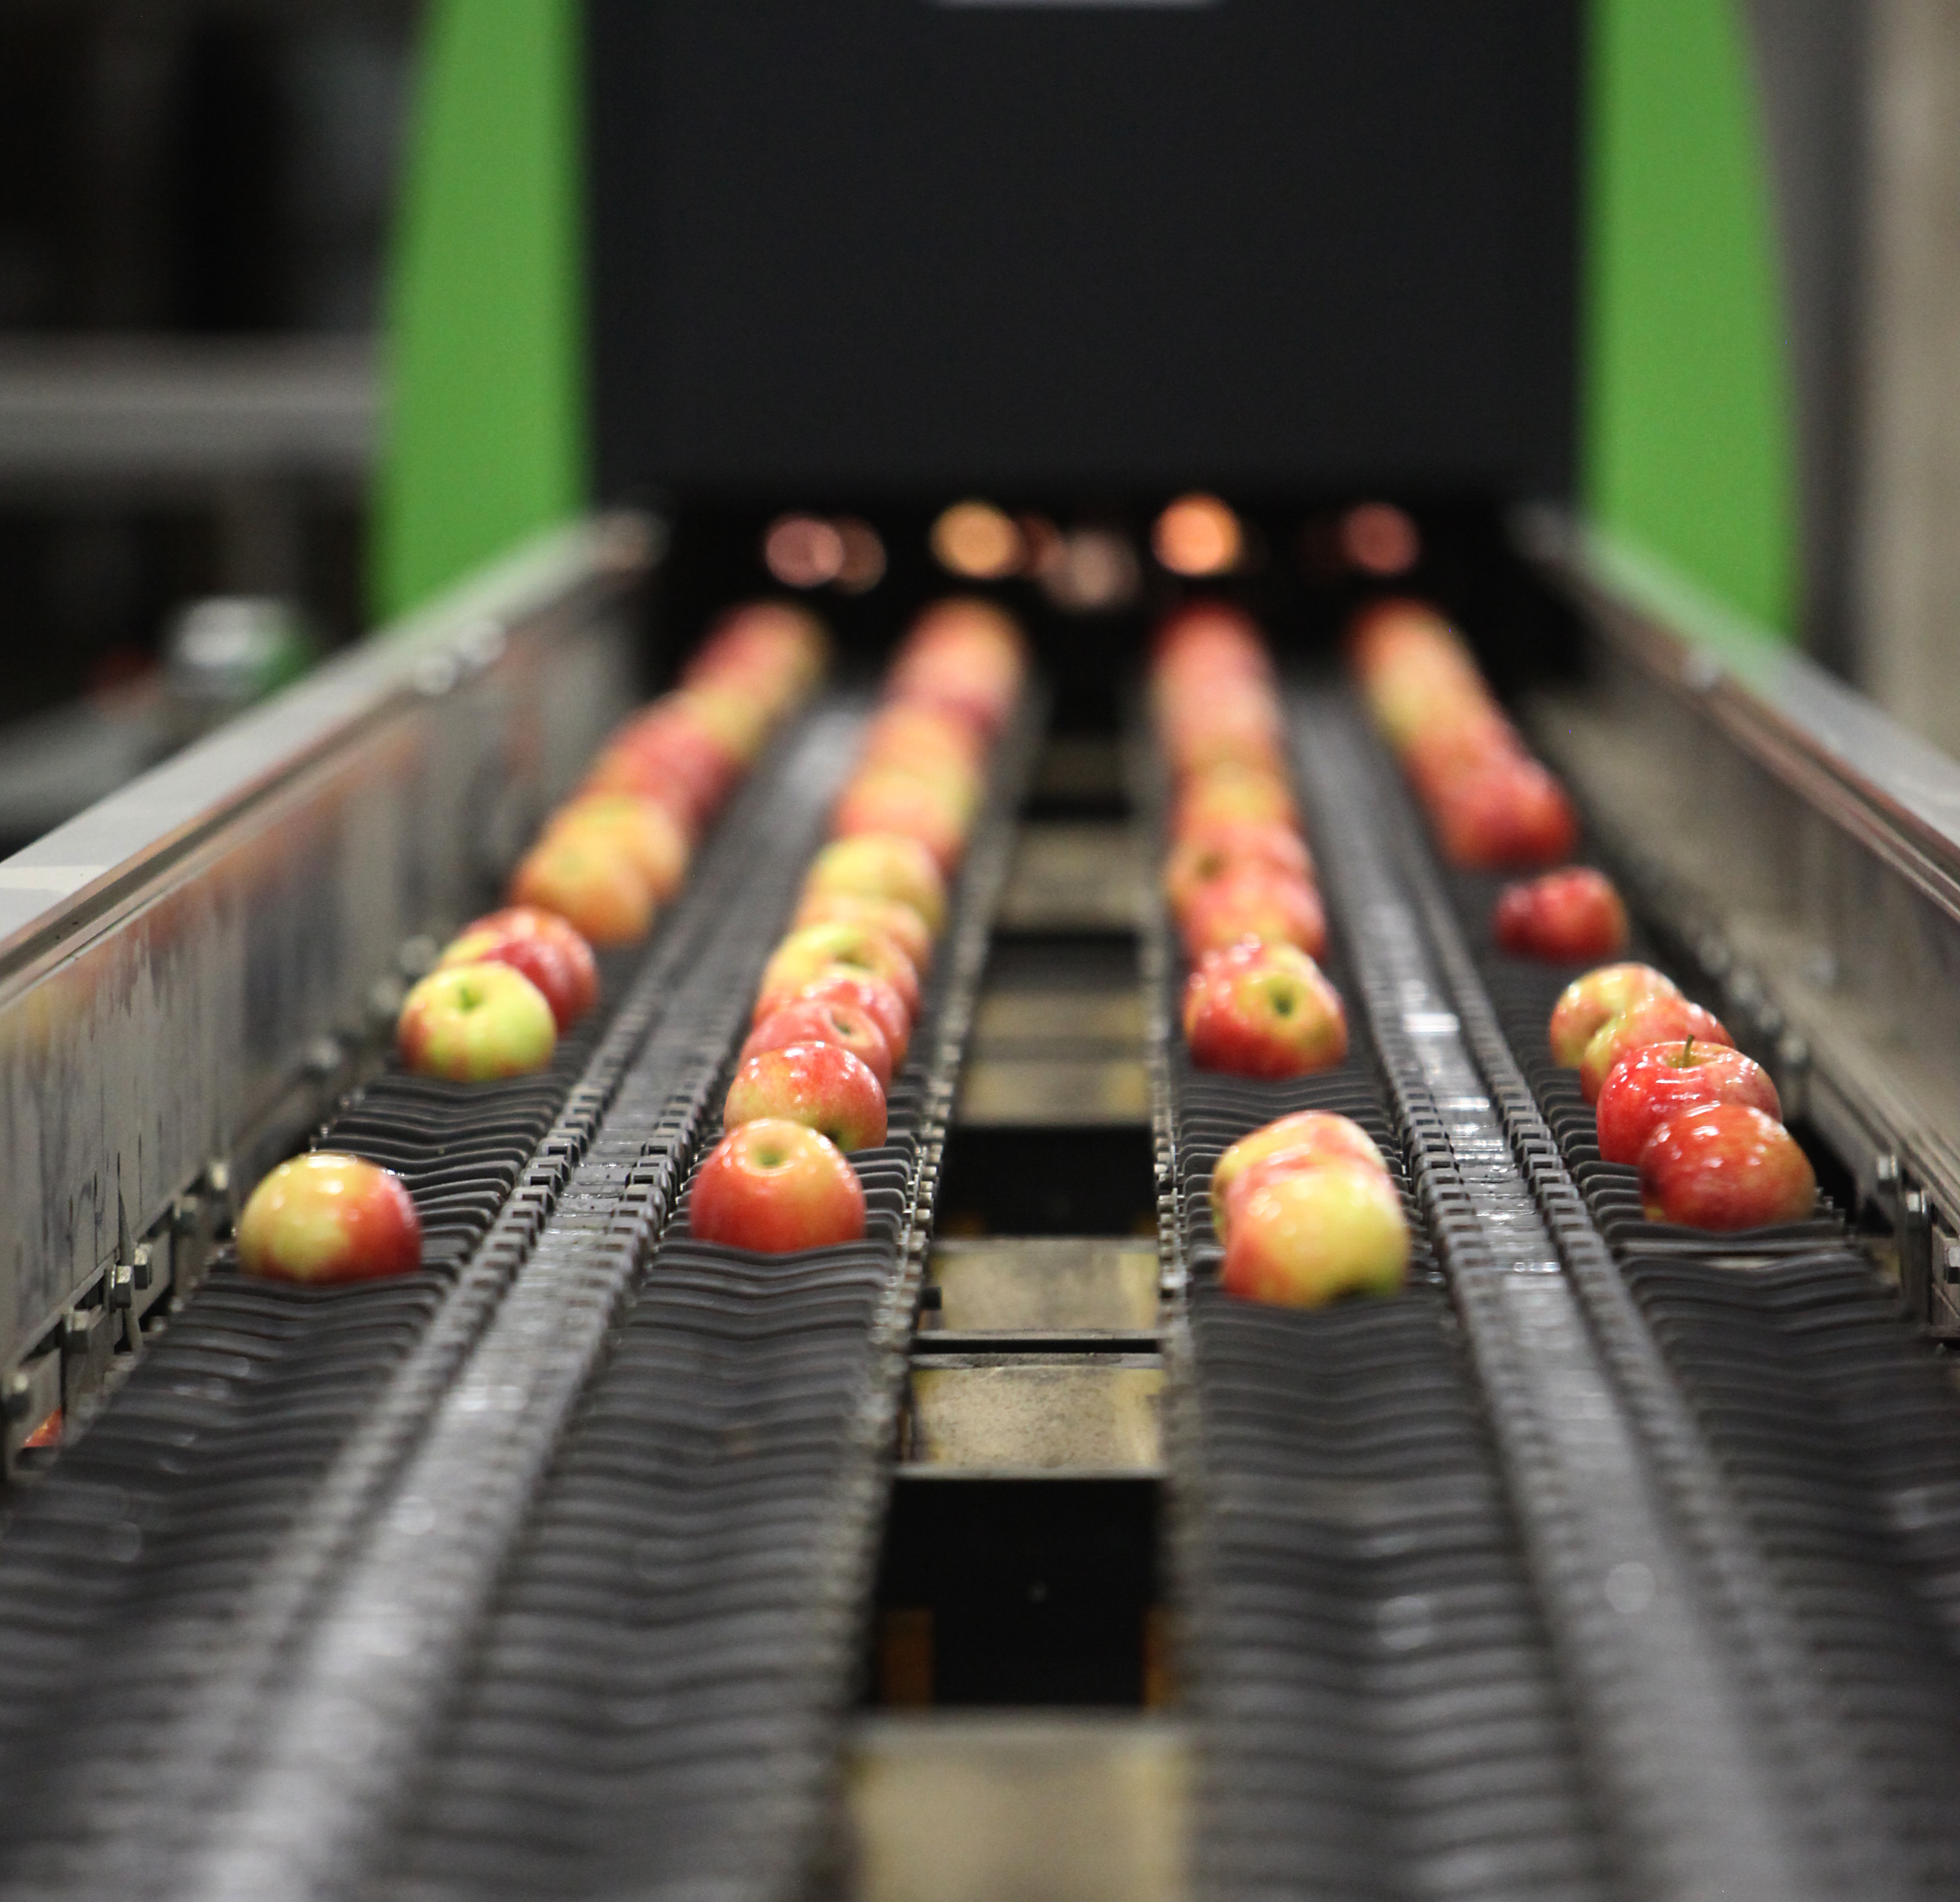 Three reasons for using SWIR infrared imaging to improve quality control in the food and beverage industry